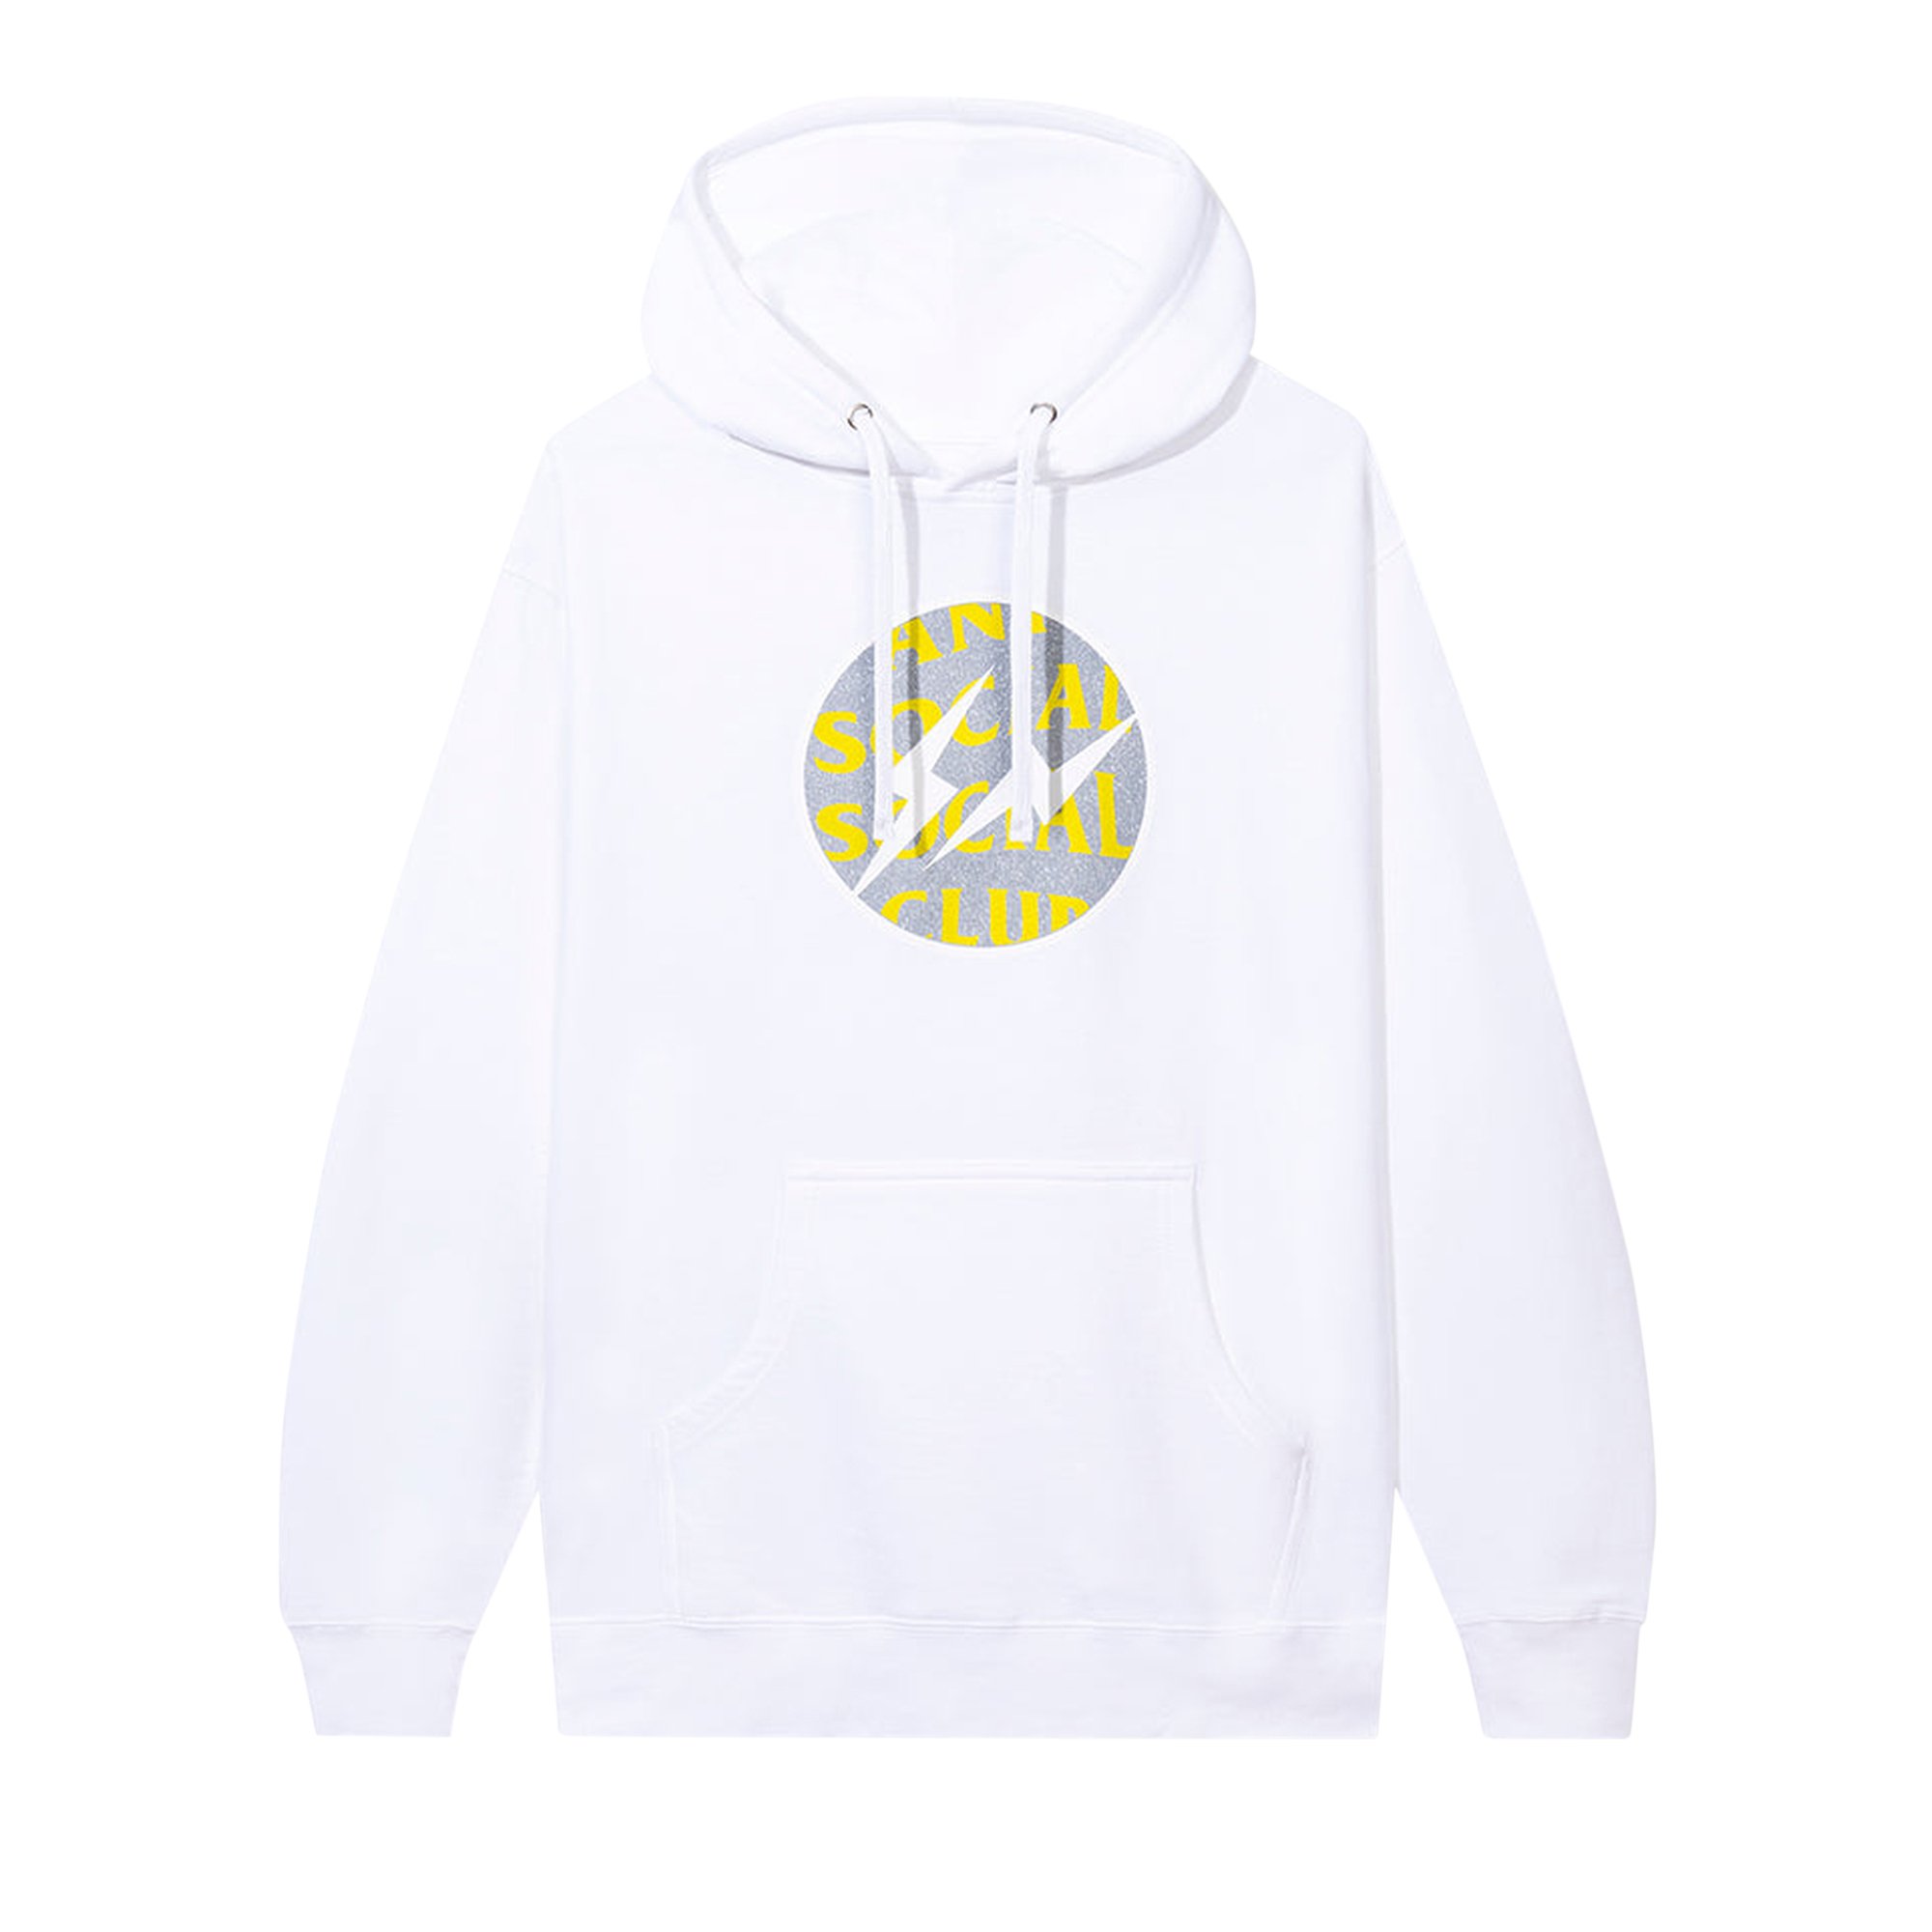 Buy Anti Social Social Club x Fragment Called Interference Hoodie ...